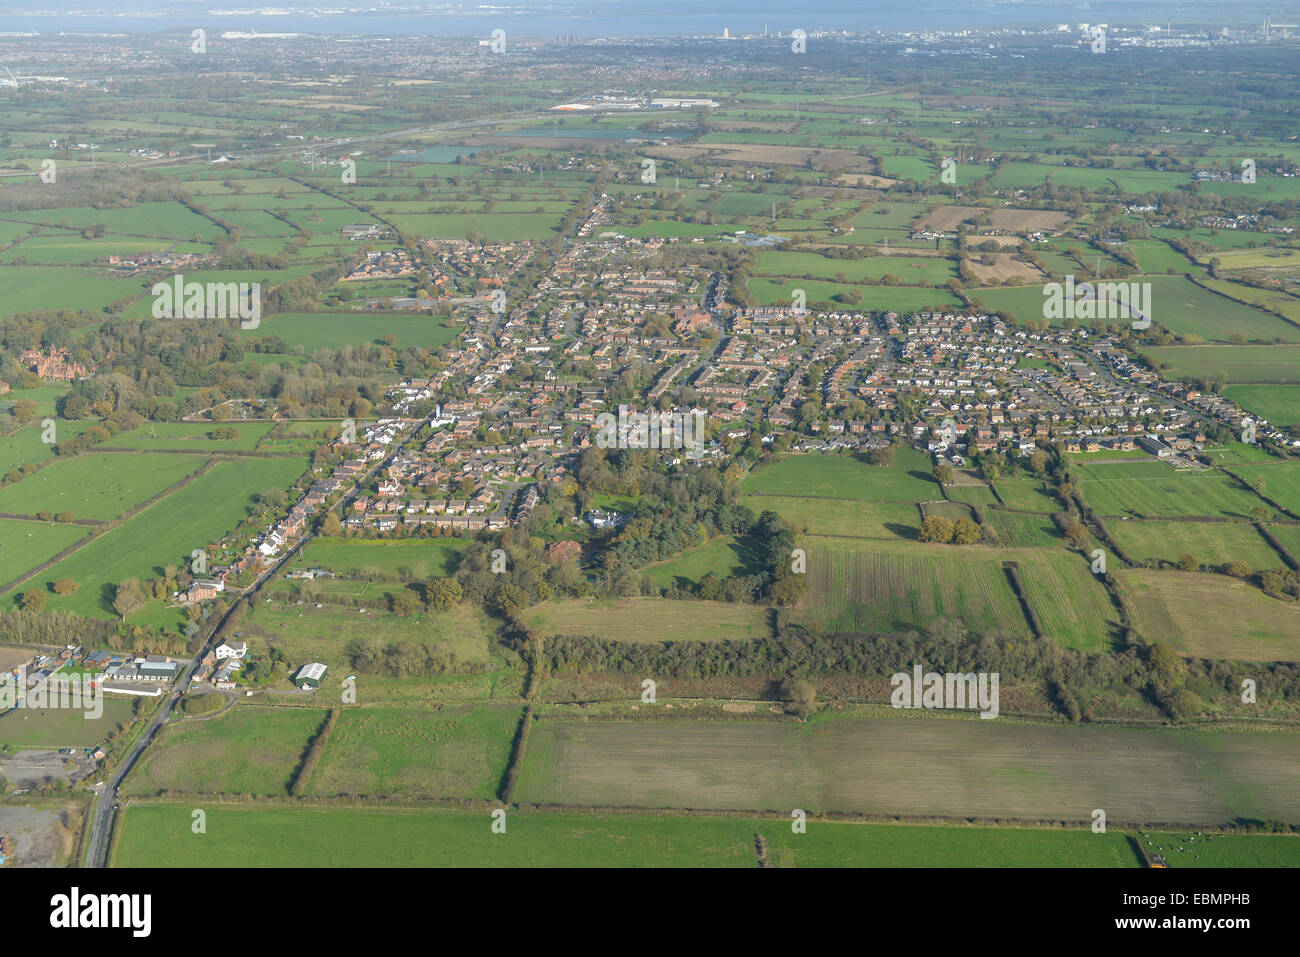 An aerial view of the Cheshire village of Saughall with surrounding countryside and Ellesmere Port visible in the distance Stock Photo